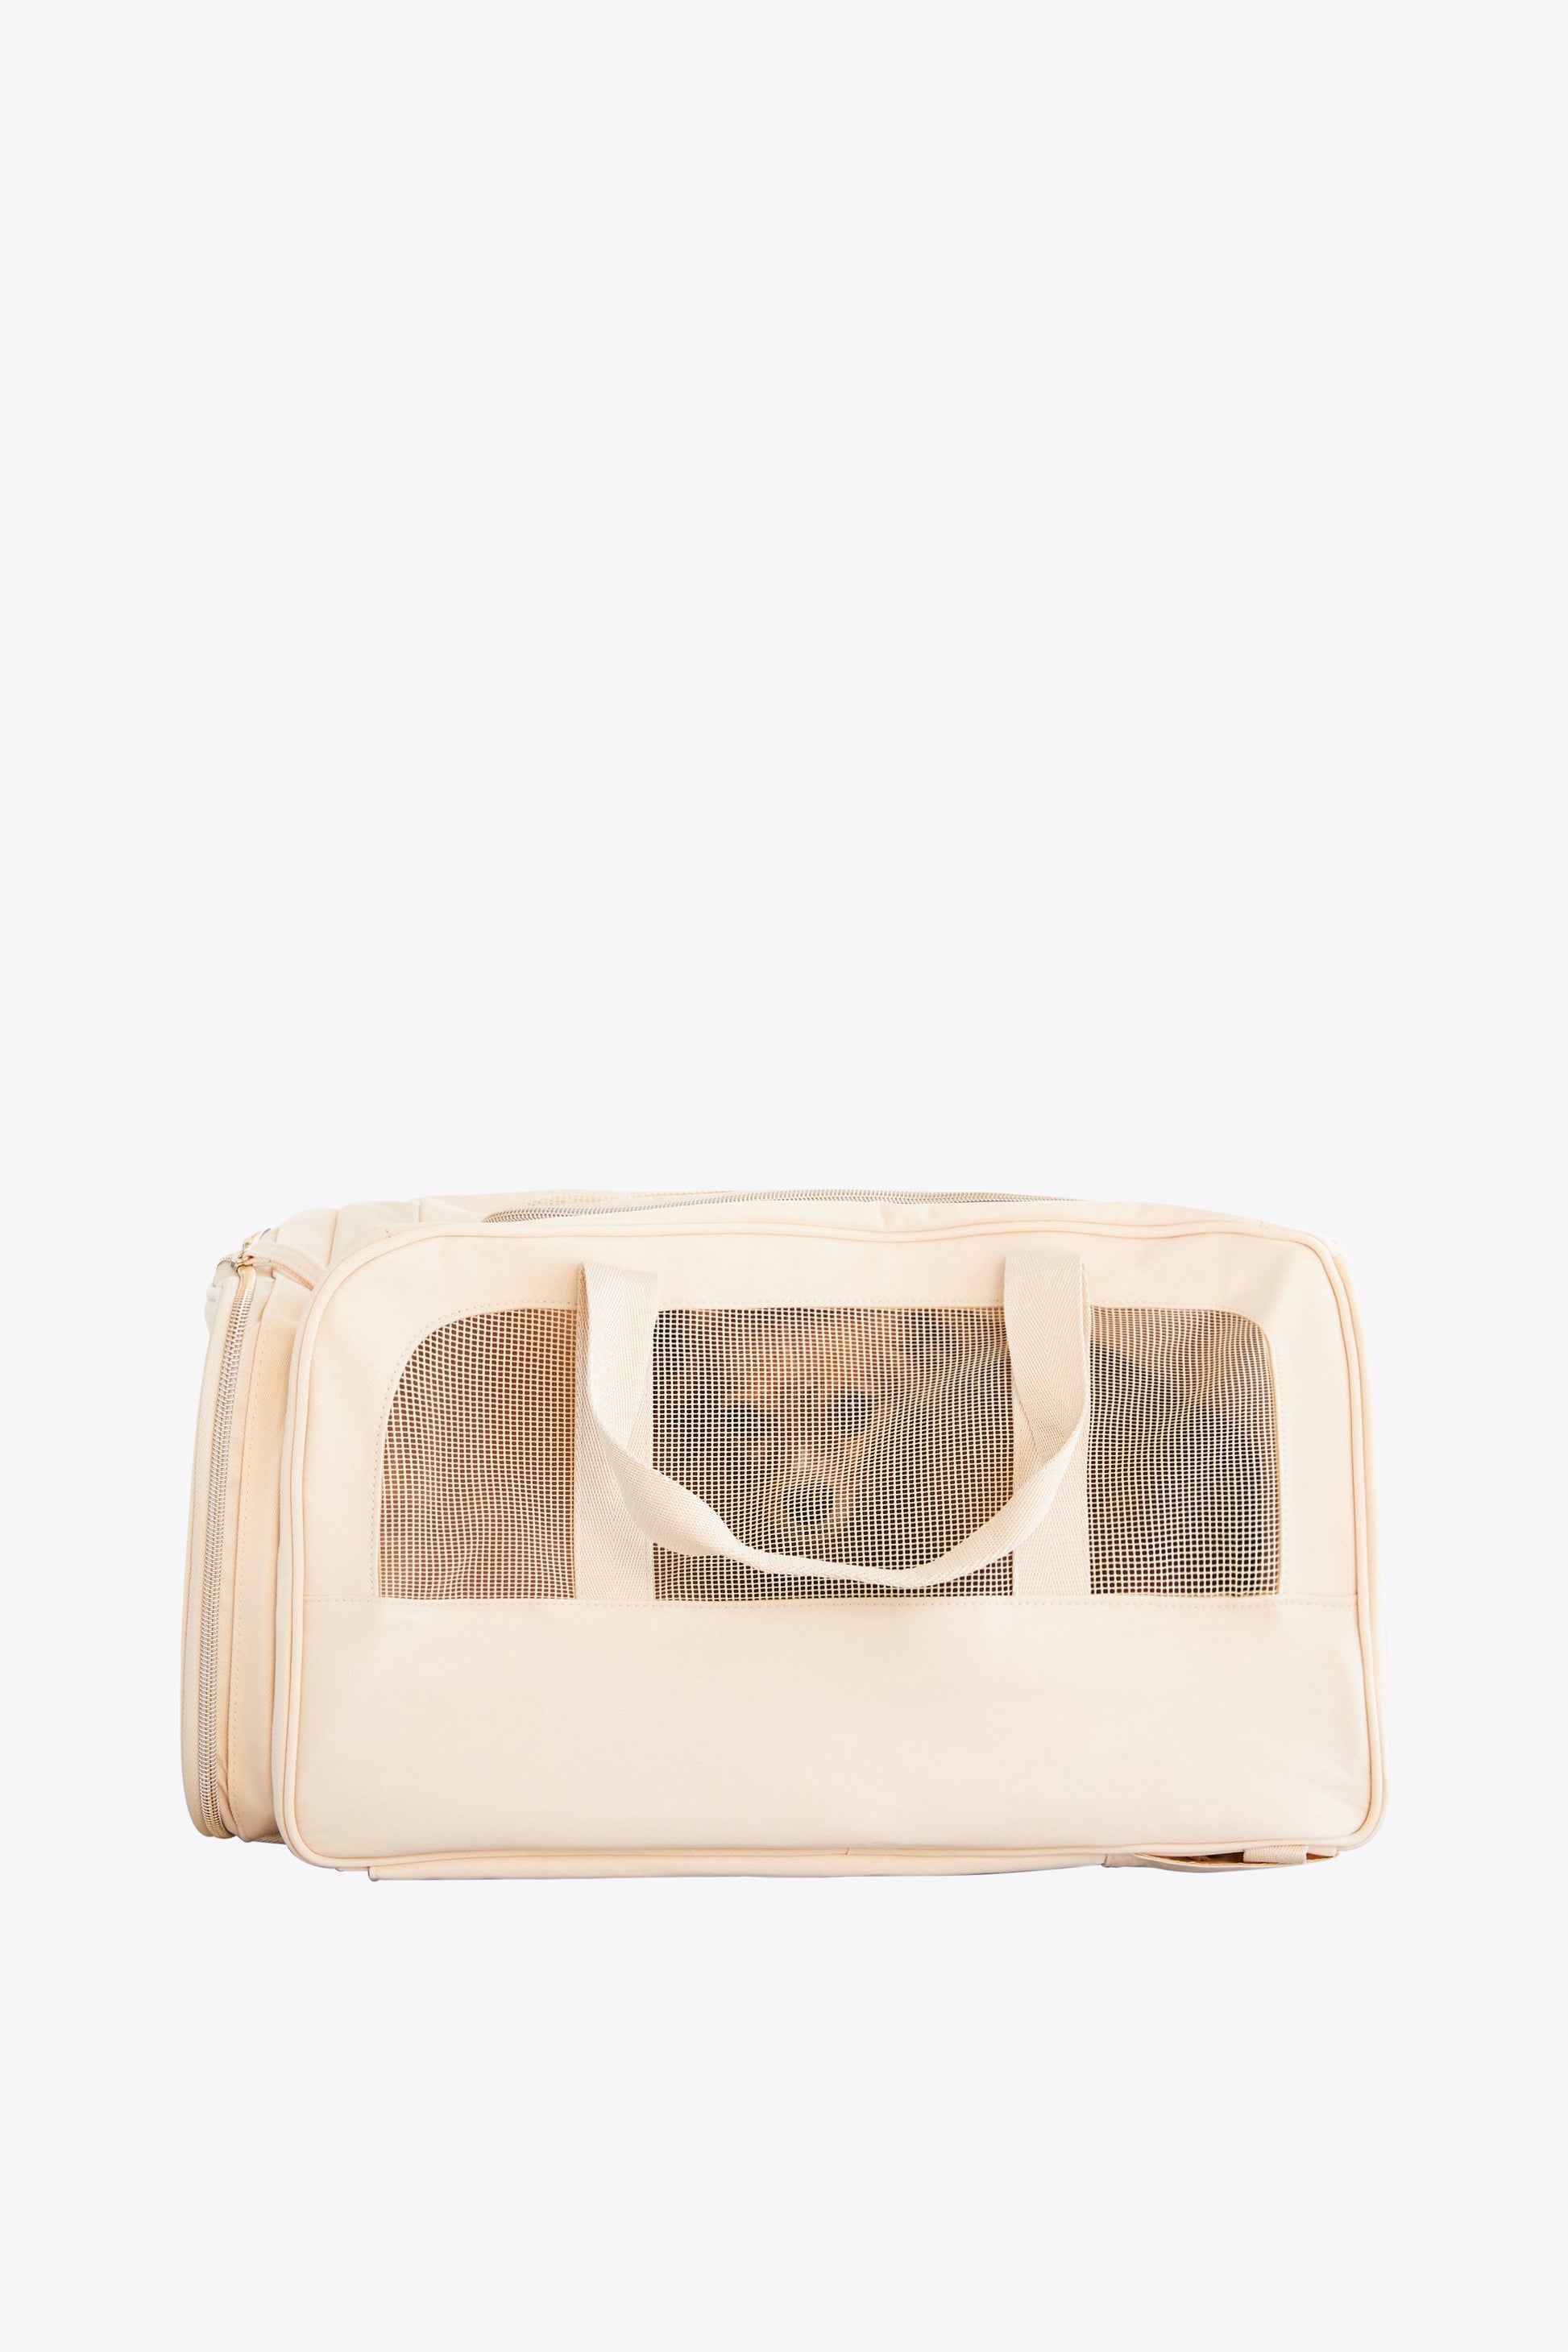 Wild One Travel Carrier - Tan